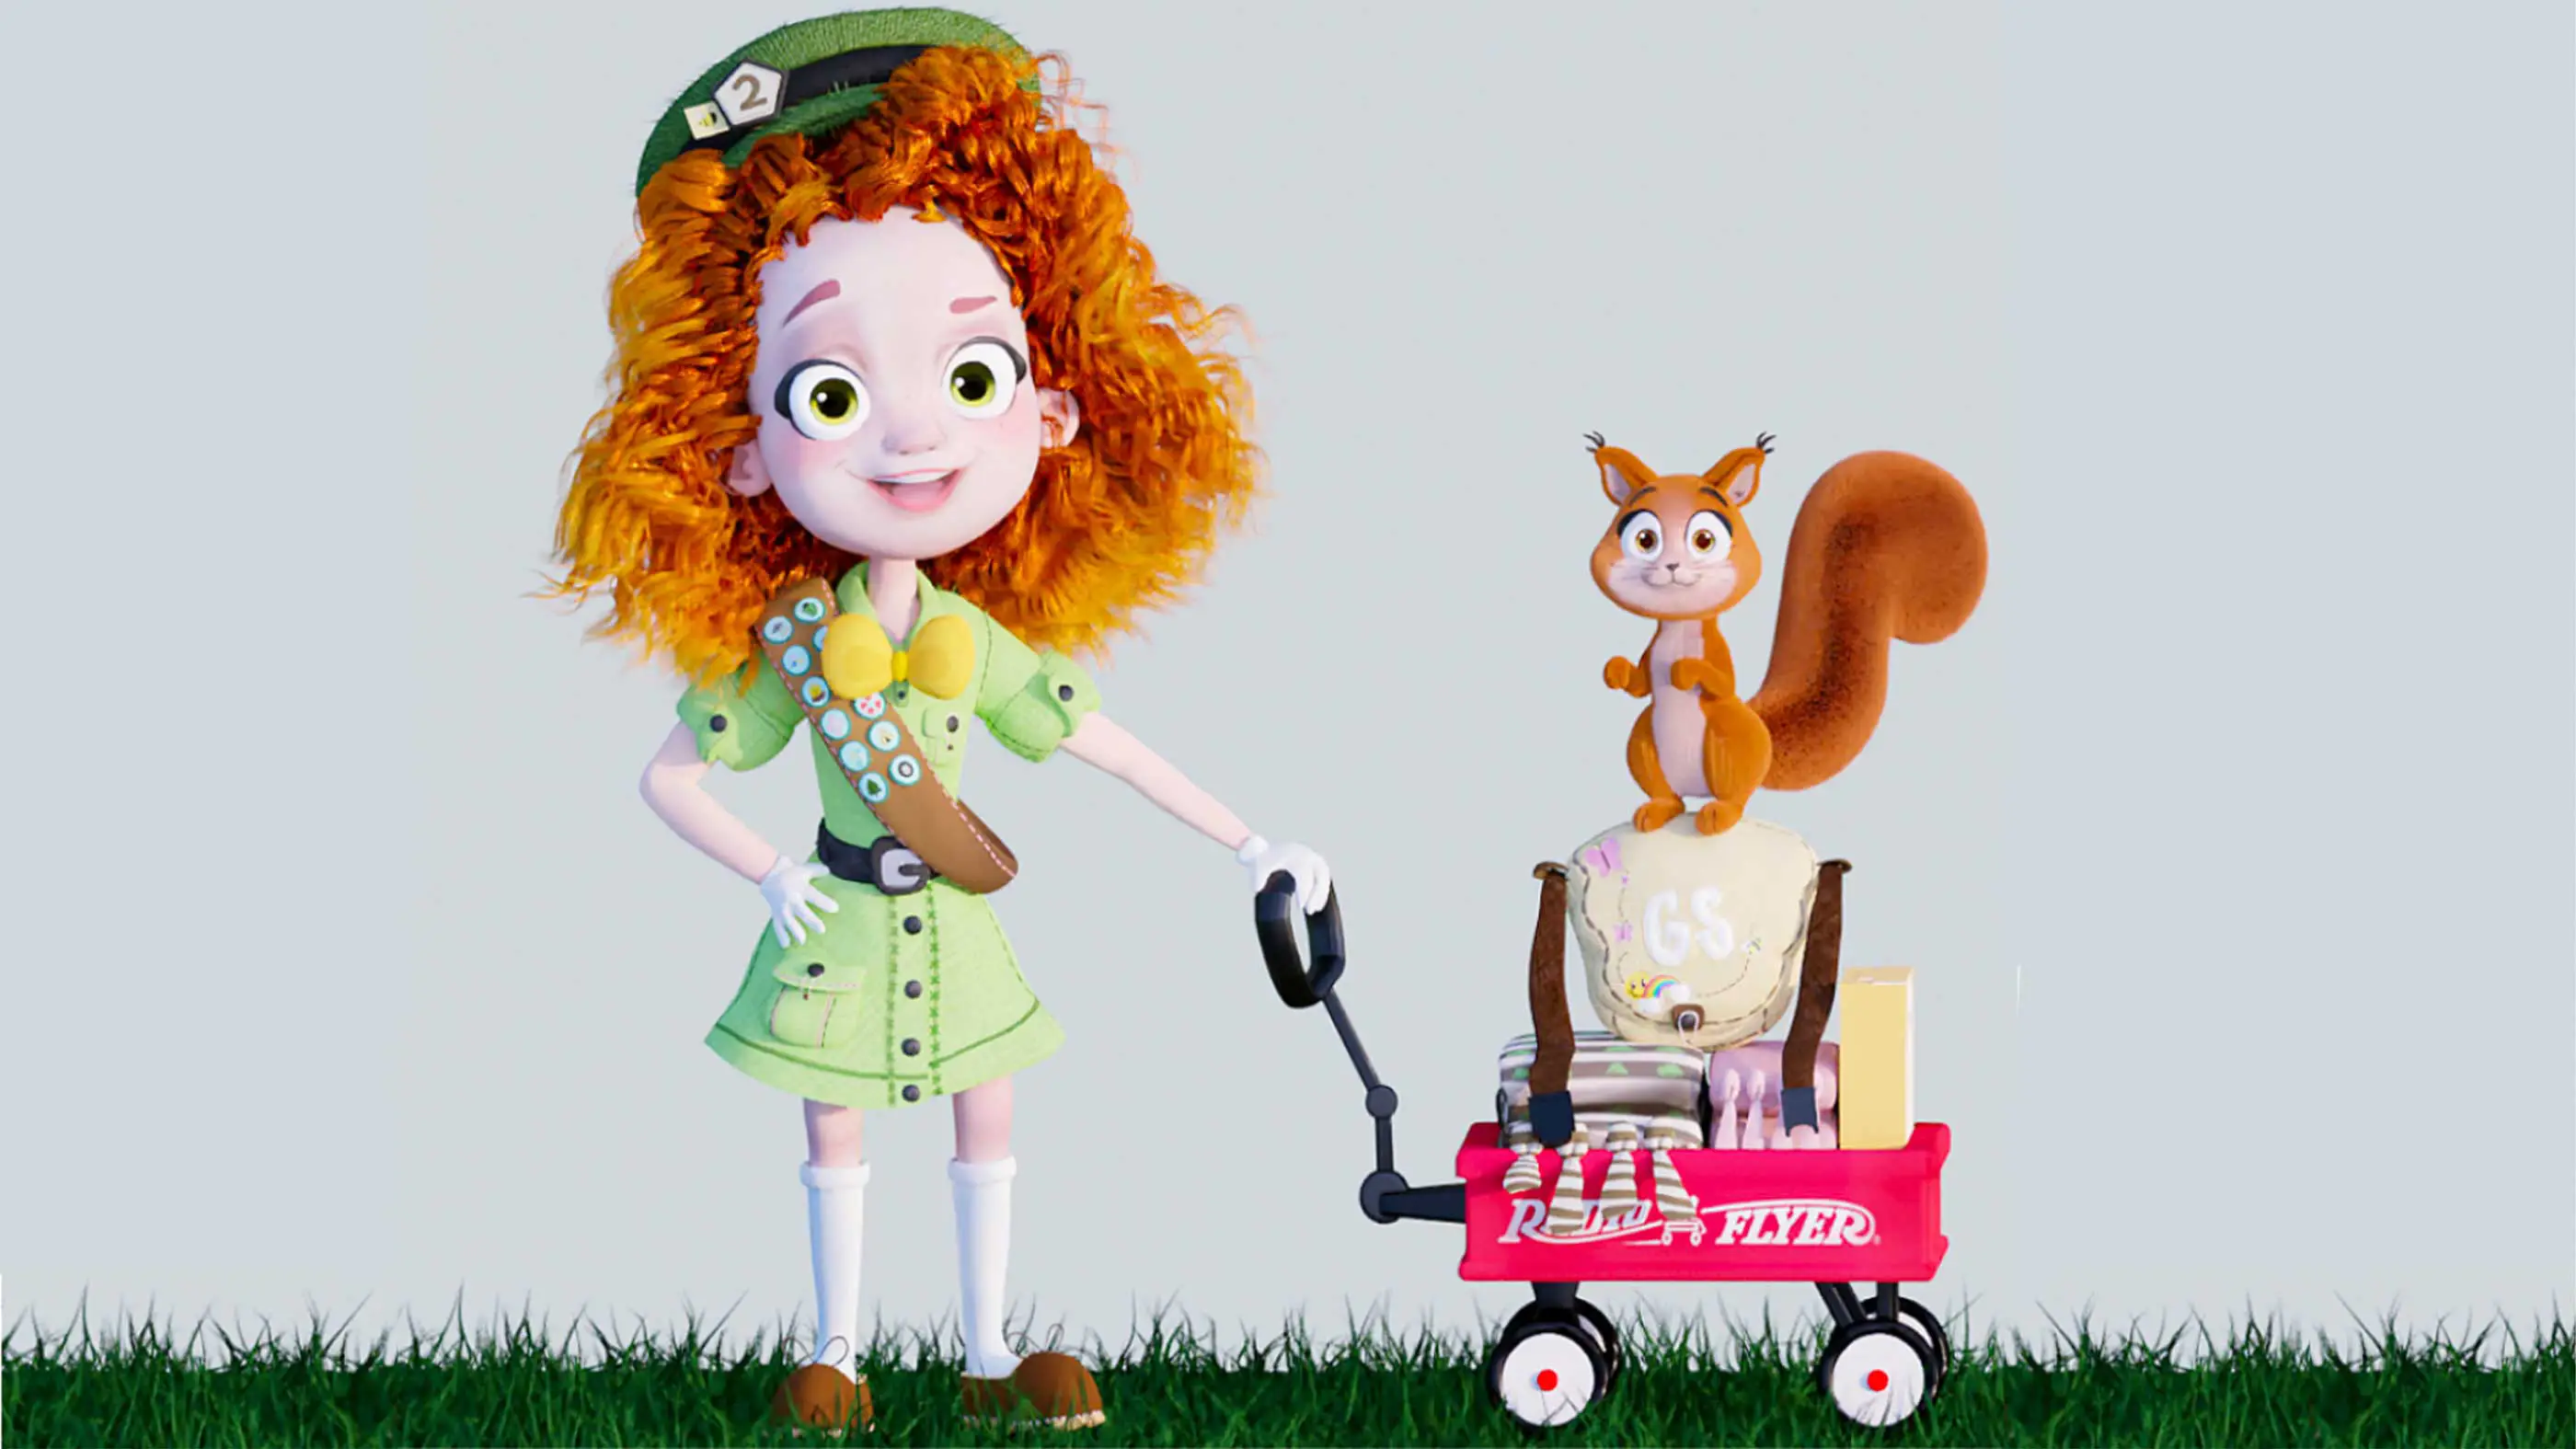 A 3D render of a girl scout pulling a wagon with a squirrel passenger.